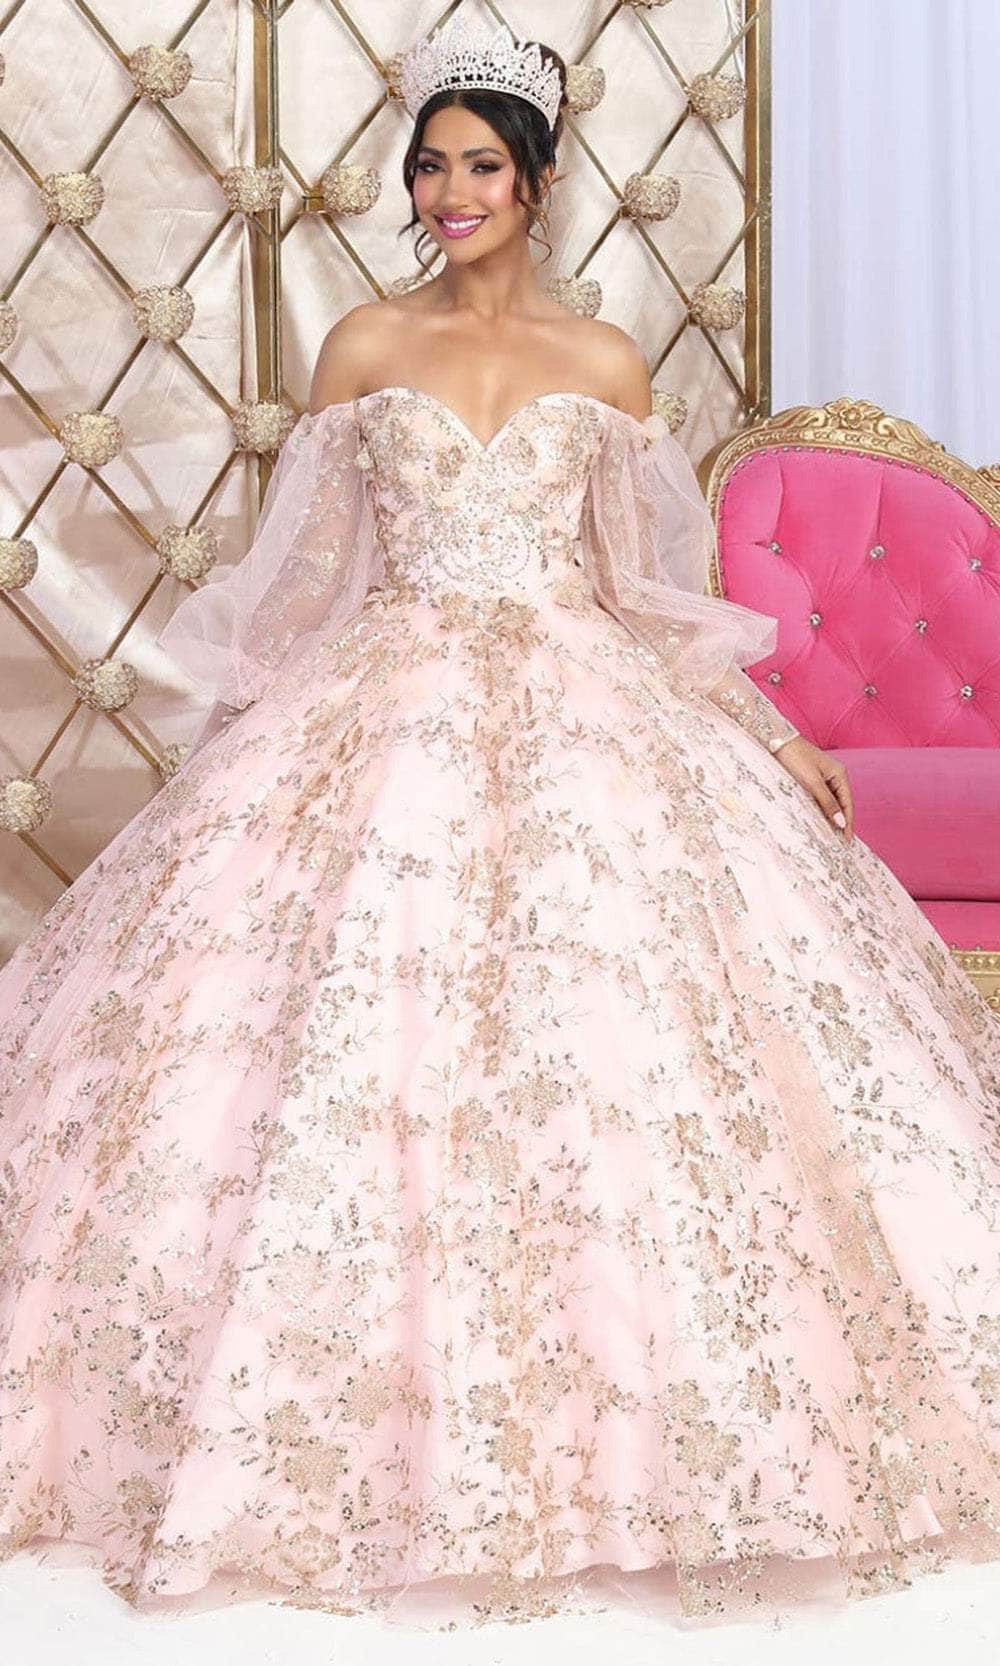 Image of May Queen LK206 - Puff Sleeve Floral Ballgown